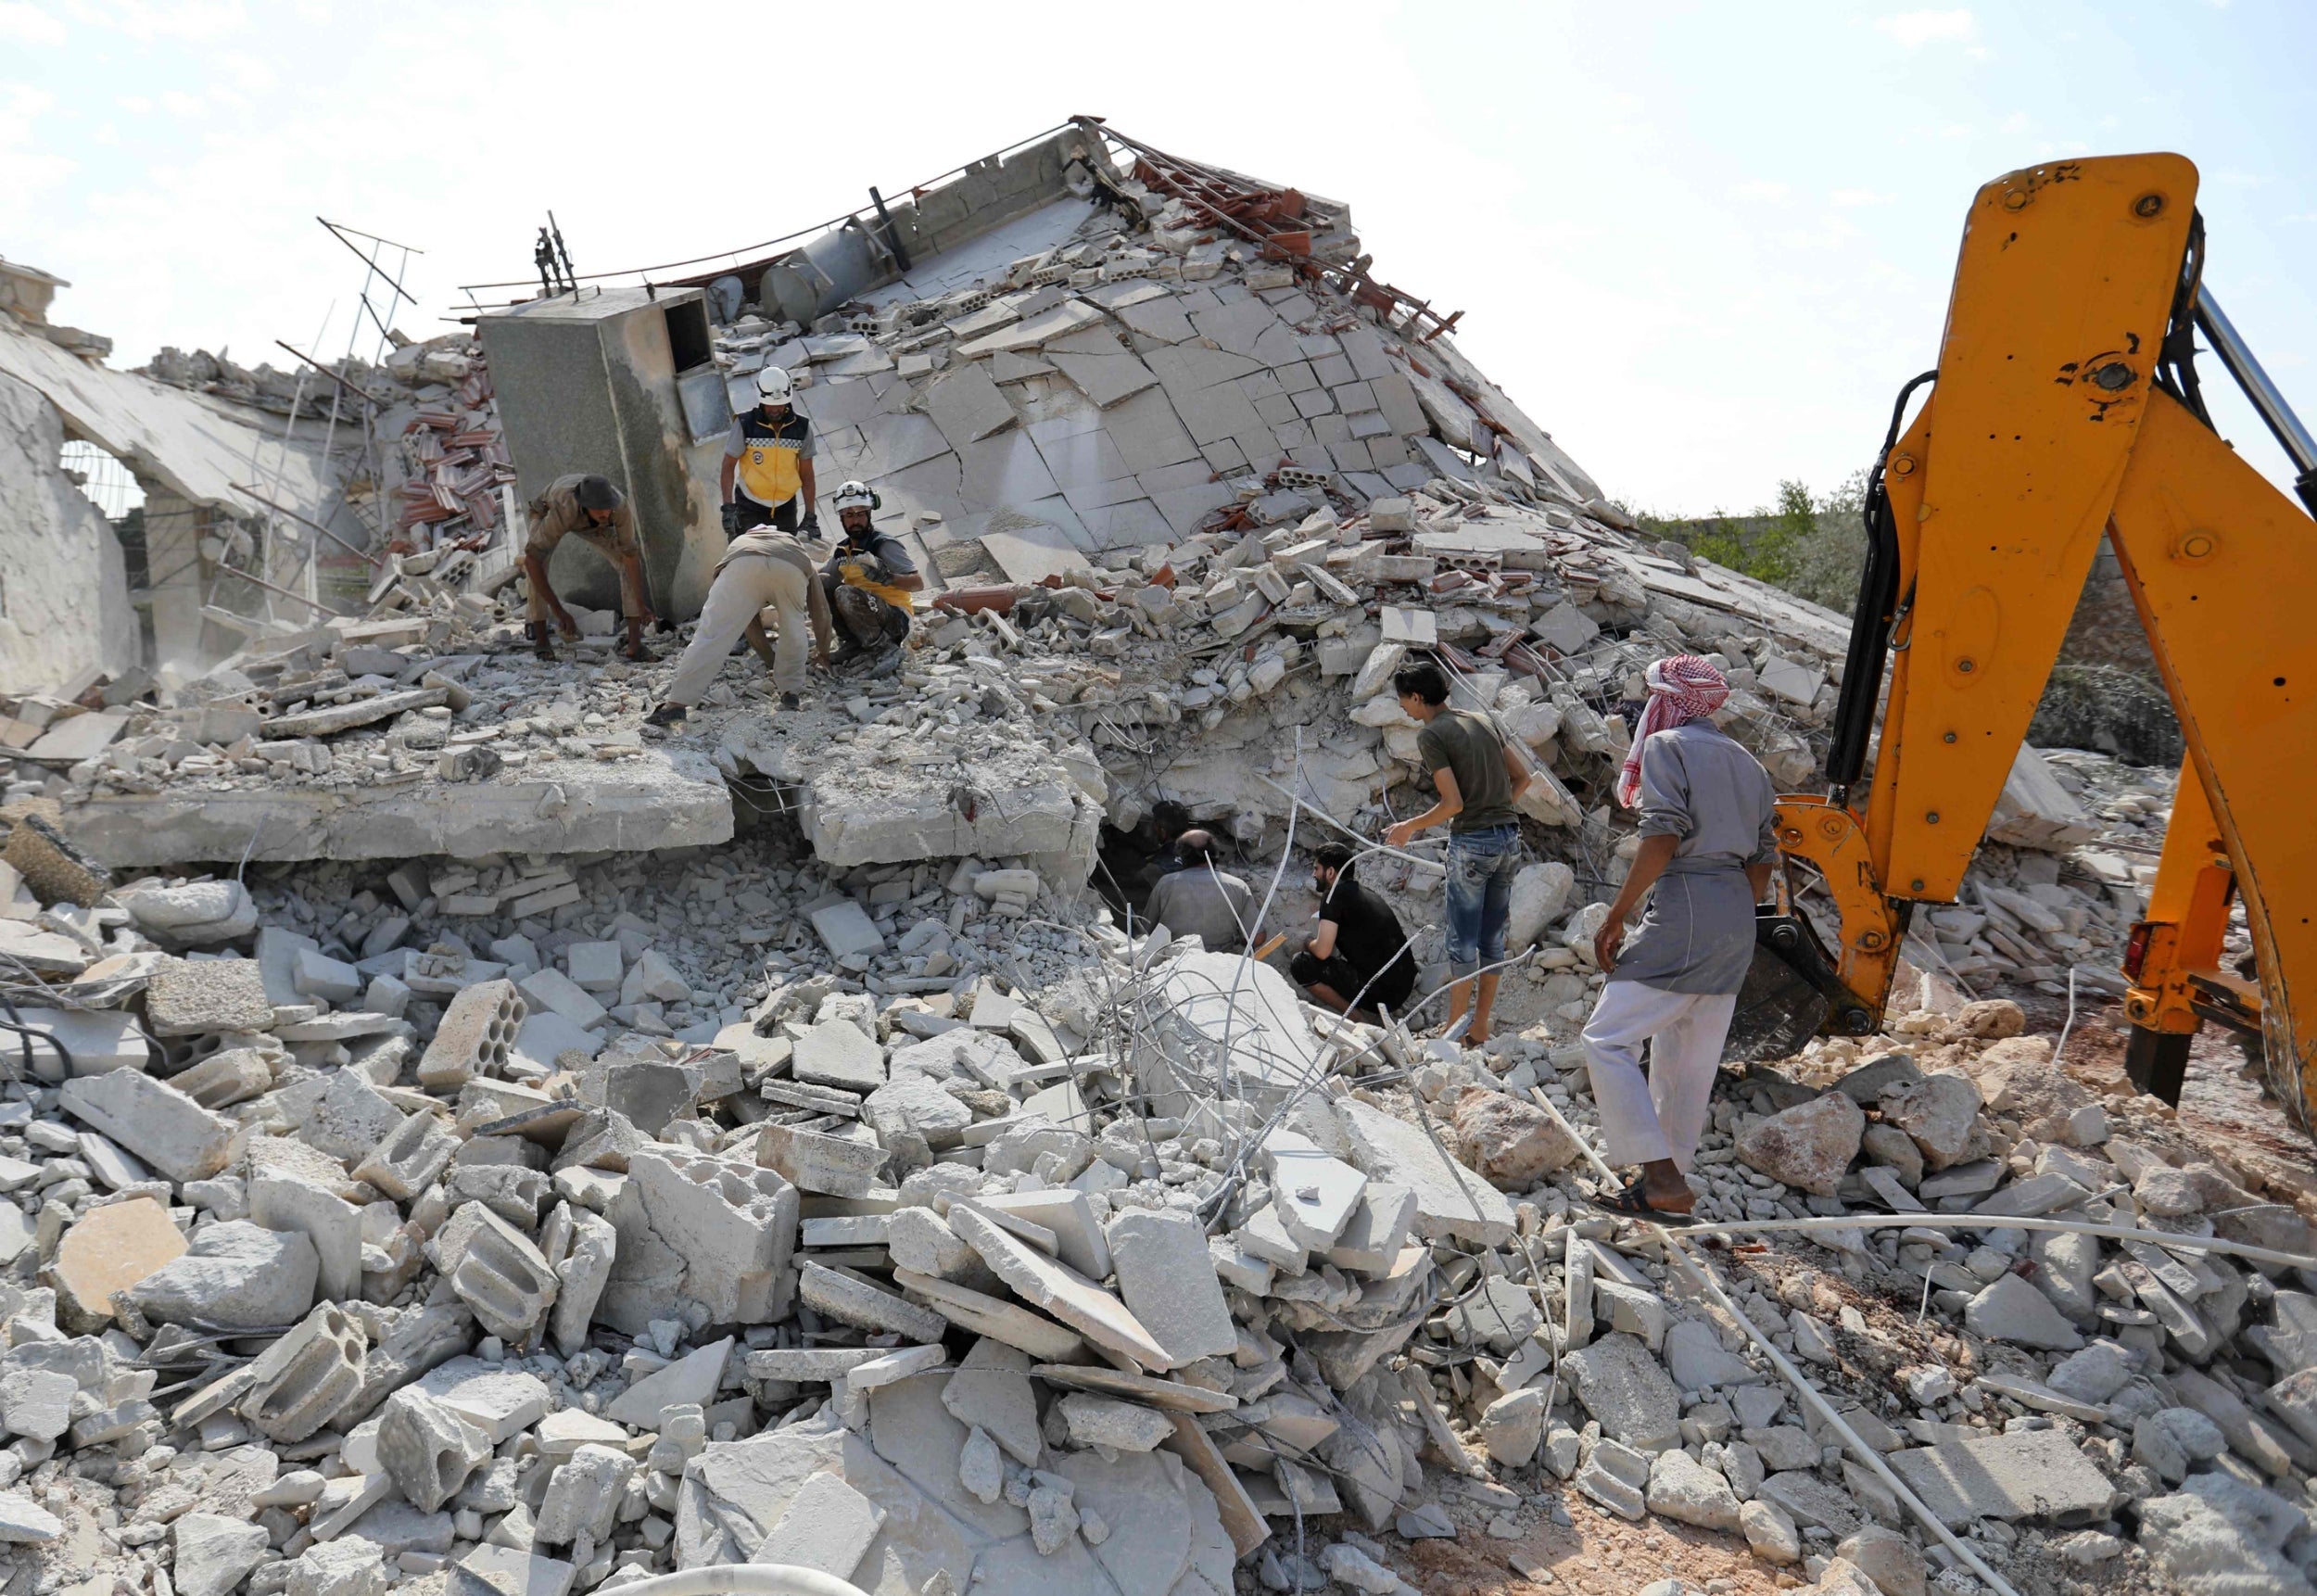 Members of the Syrian Civil Defence (White Helmets) search for victims amidst the rubble of a building that collapsed during reported air strikes by pro-regime forces in the village of Beinin, north of Maaret al-Numan, in the northern Idlib province